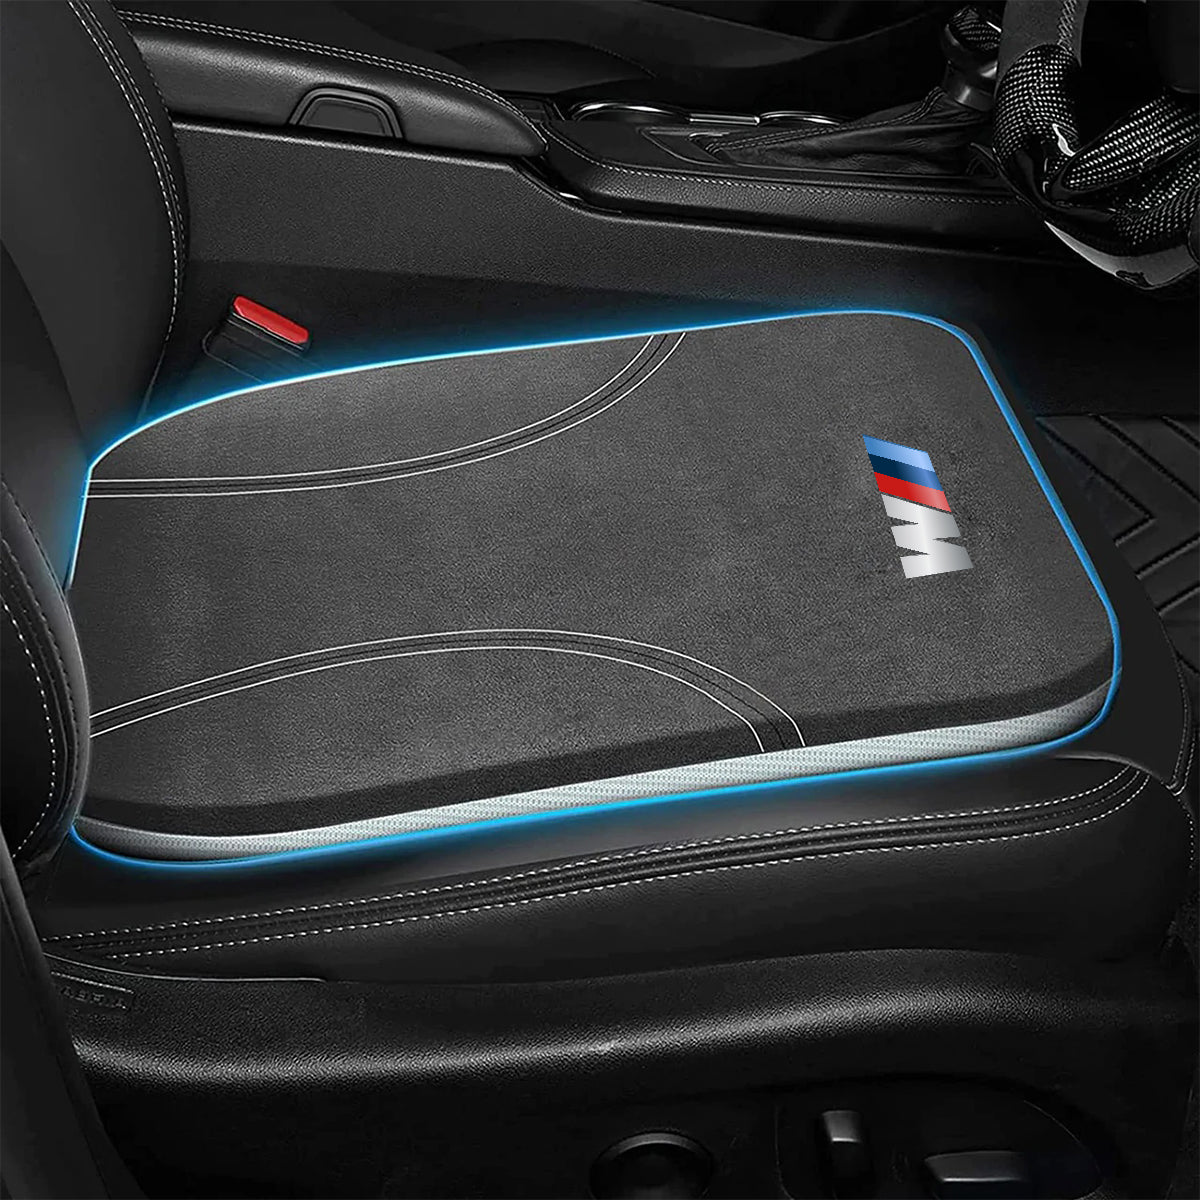 Car Seat Cushion, Custom Fit For Your Cars, Car Memory Foam Seat Cushion, Heightening Seat Cushion, Seat Cushion for Car and Office Chair KO19999